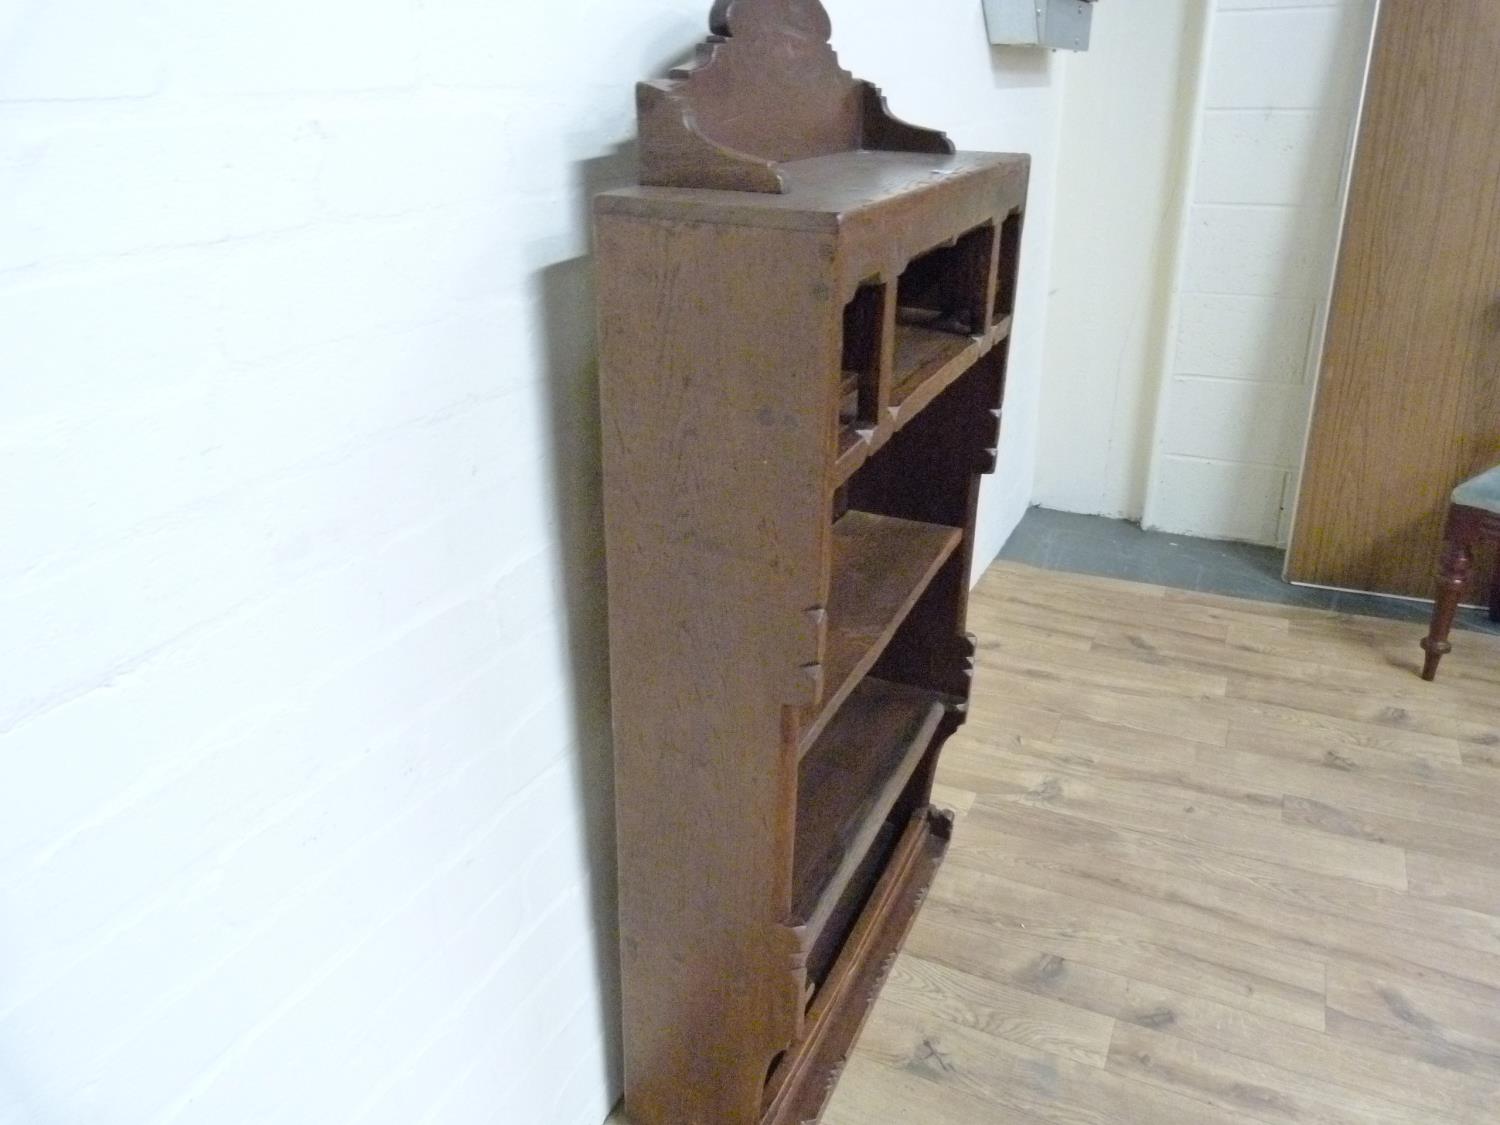 Provincial Arts & Crafts oak bookcase by Orlando Greenwood, with raised back, graduated shelves - Image 2 of 6